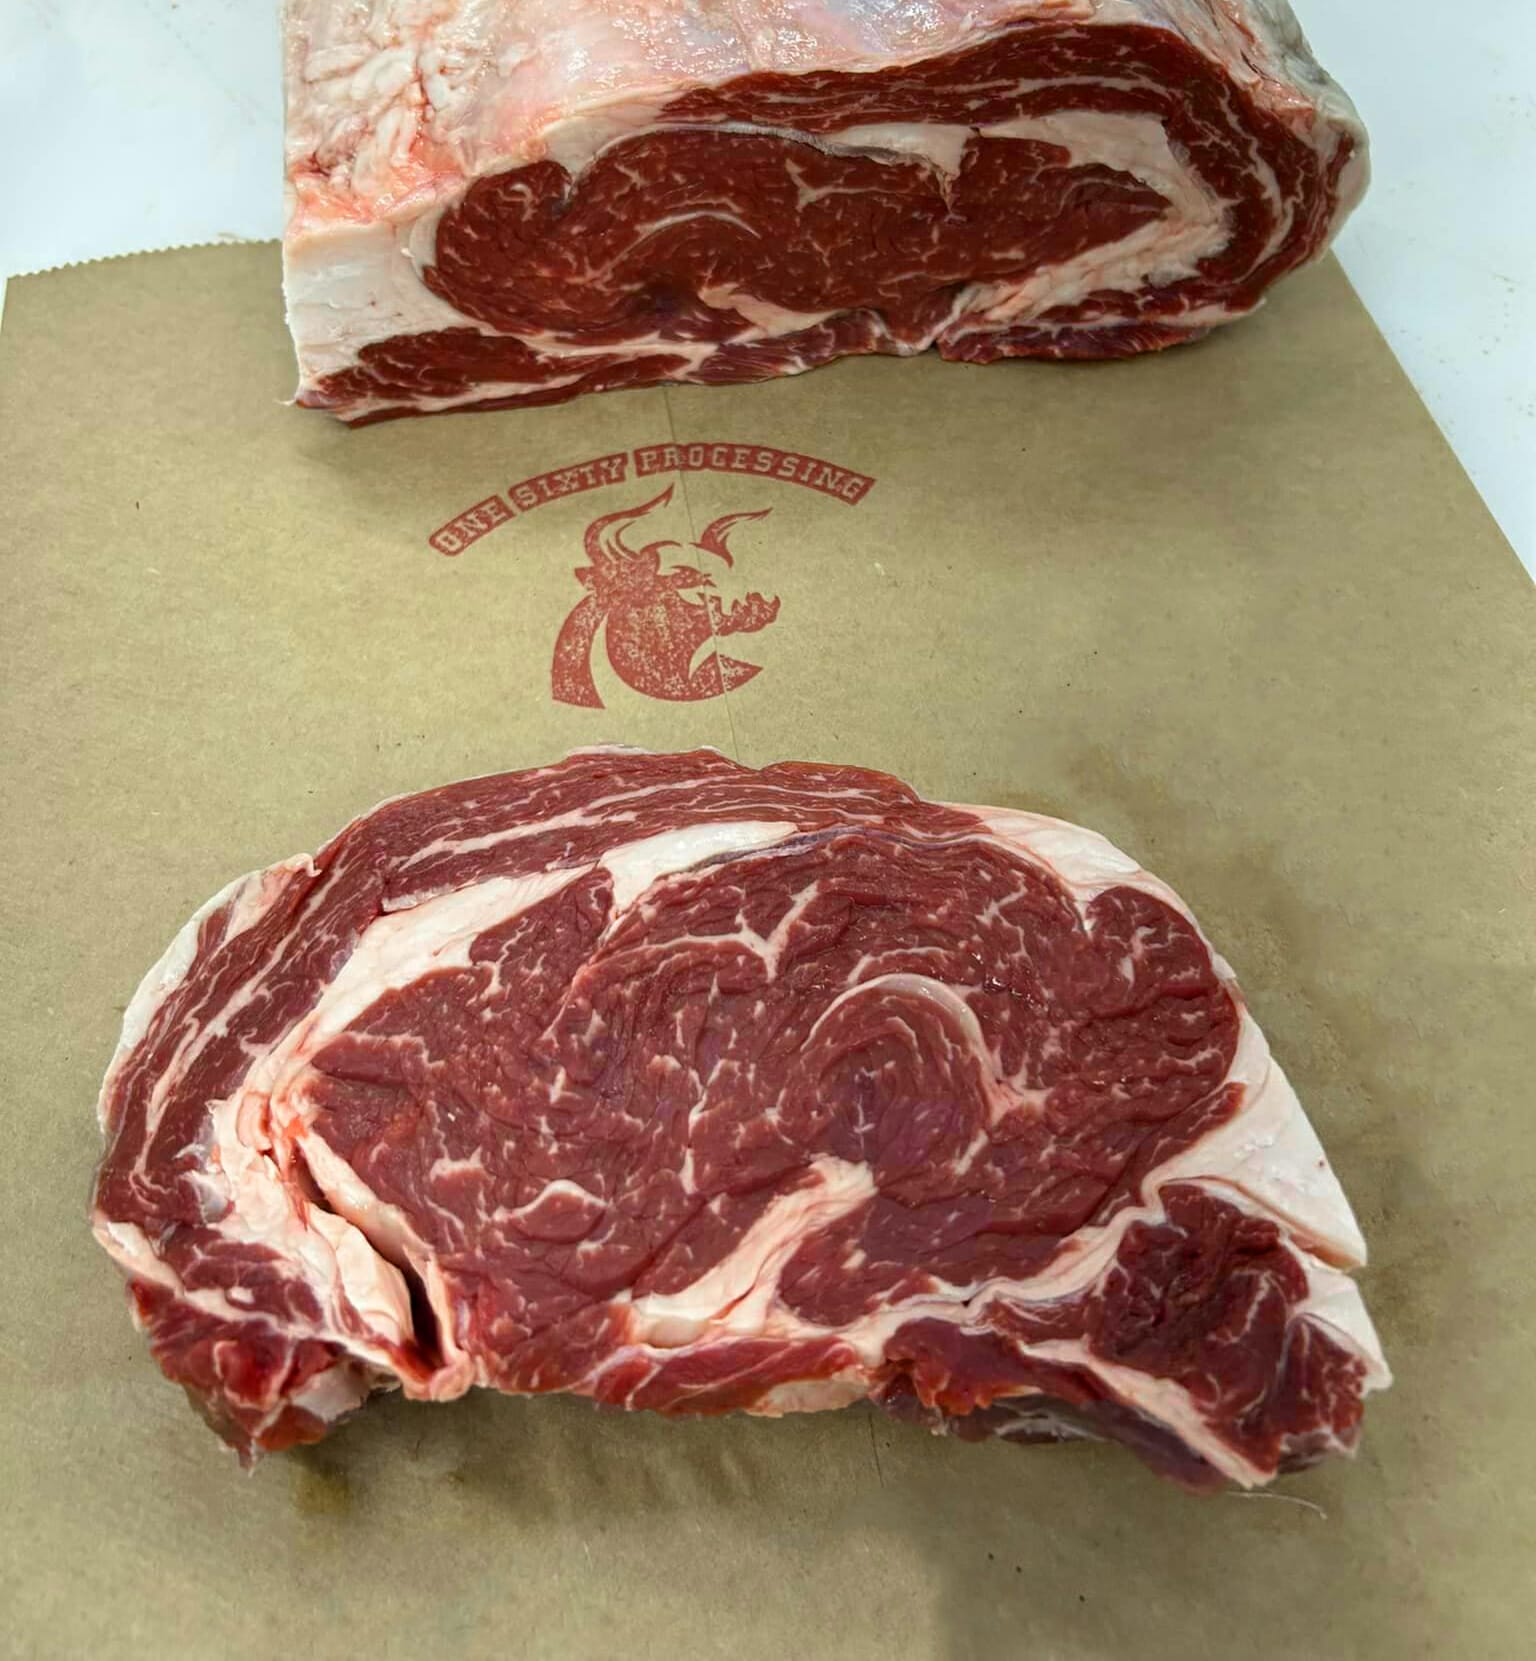 Ribeye as requested from our custom meat processing customers.